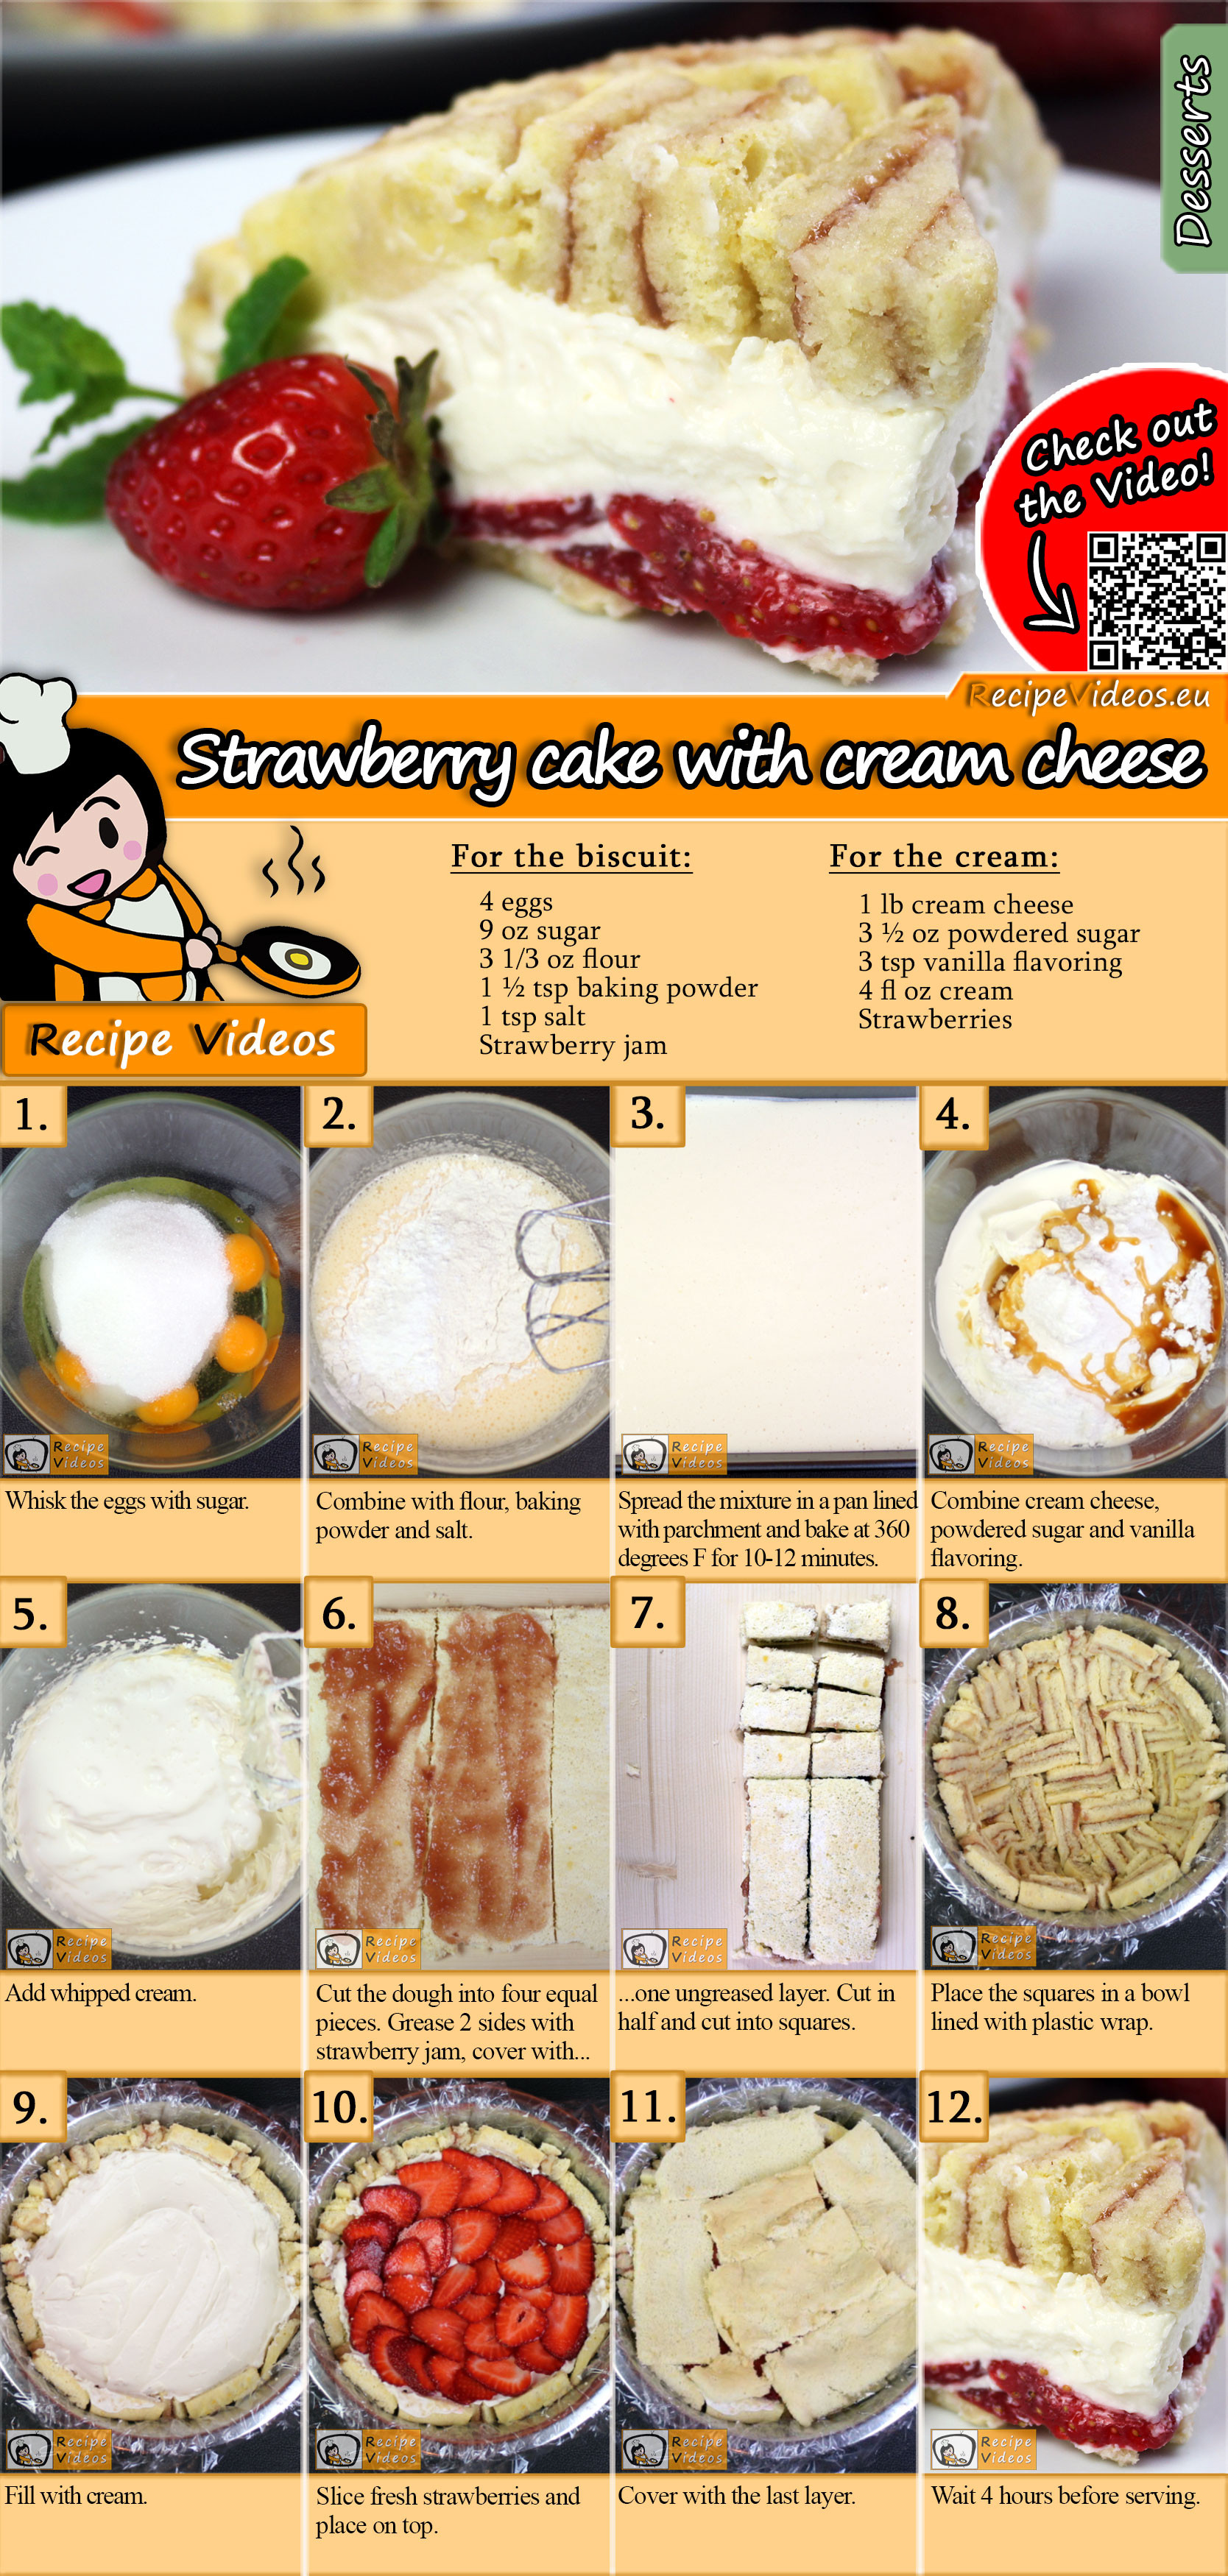 Strawberry cake with cream cheese recipe with video